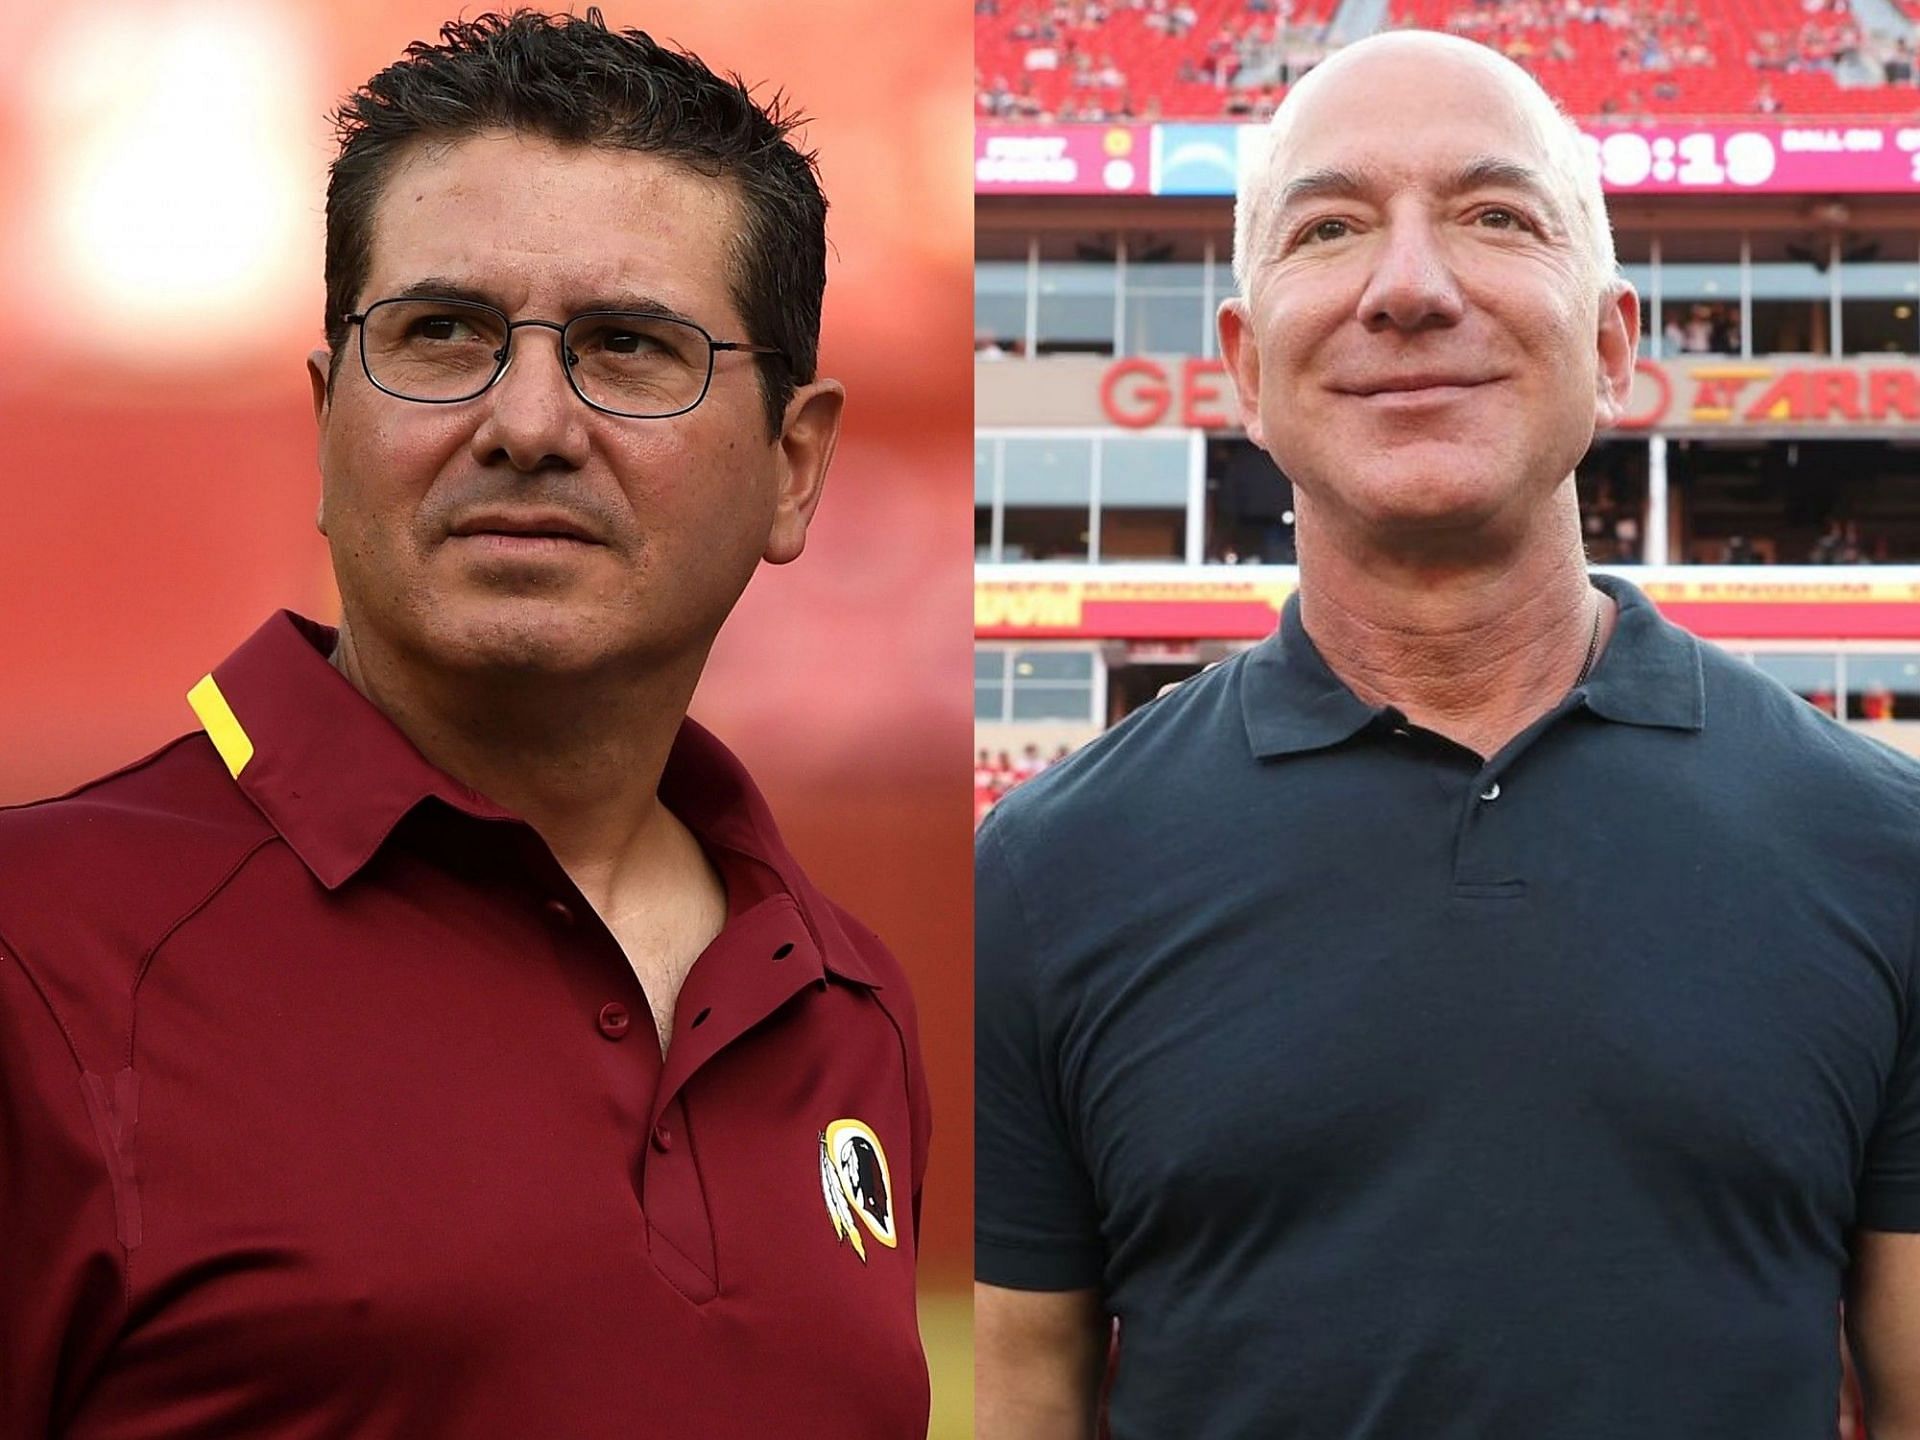 Jeff Bezos and Dan Snyder potentially prepping for expensivly lucrative transaction